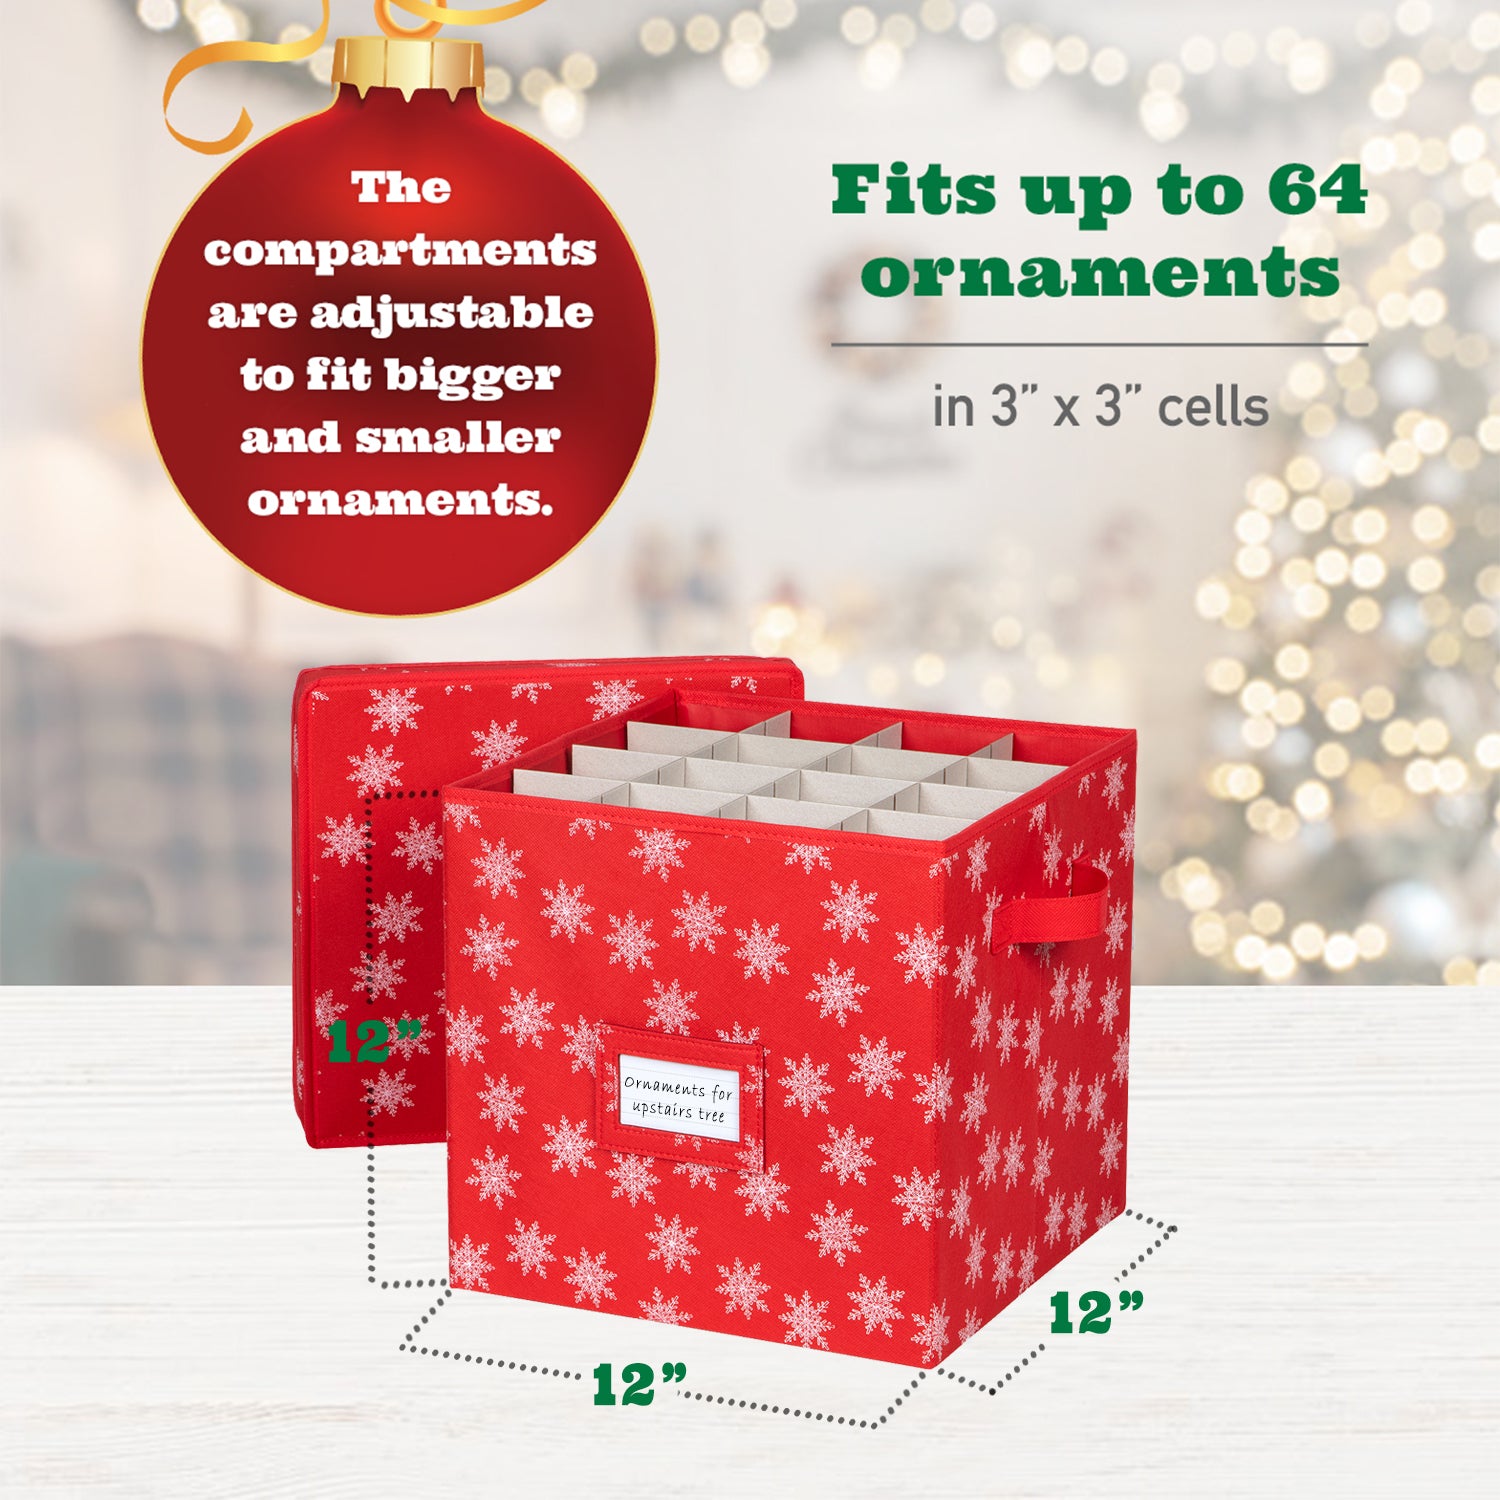 Christmas Ornament Storage Box with Lid - Christmas Decor Storage Containers that Store up to 64 Holiday Ornaments